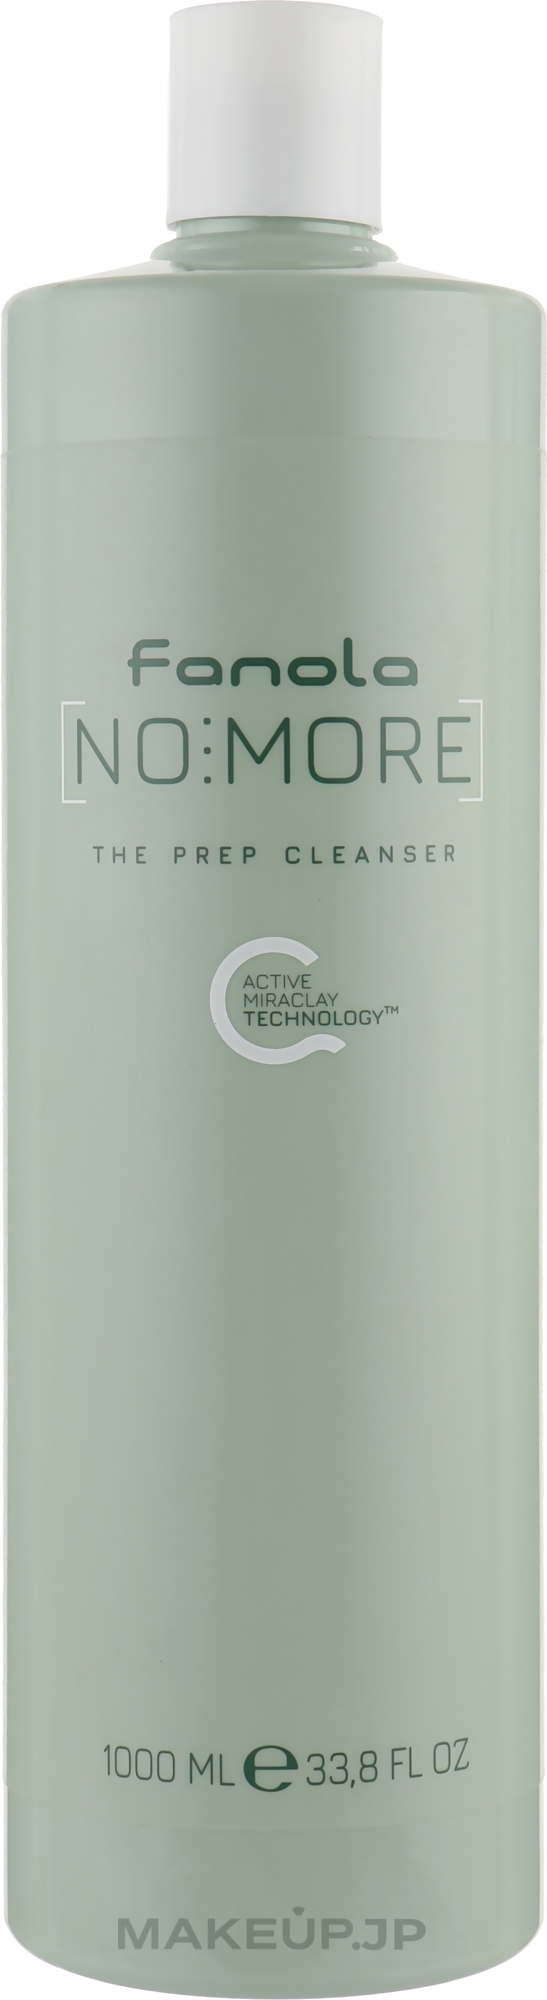 Deep Cleansing Shampoo - No More The Prep Cleanser — photo 1000 ml